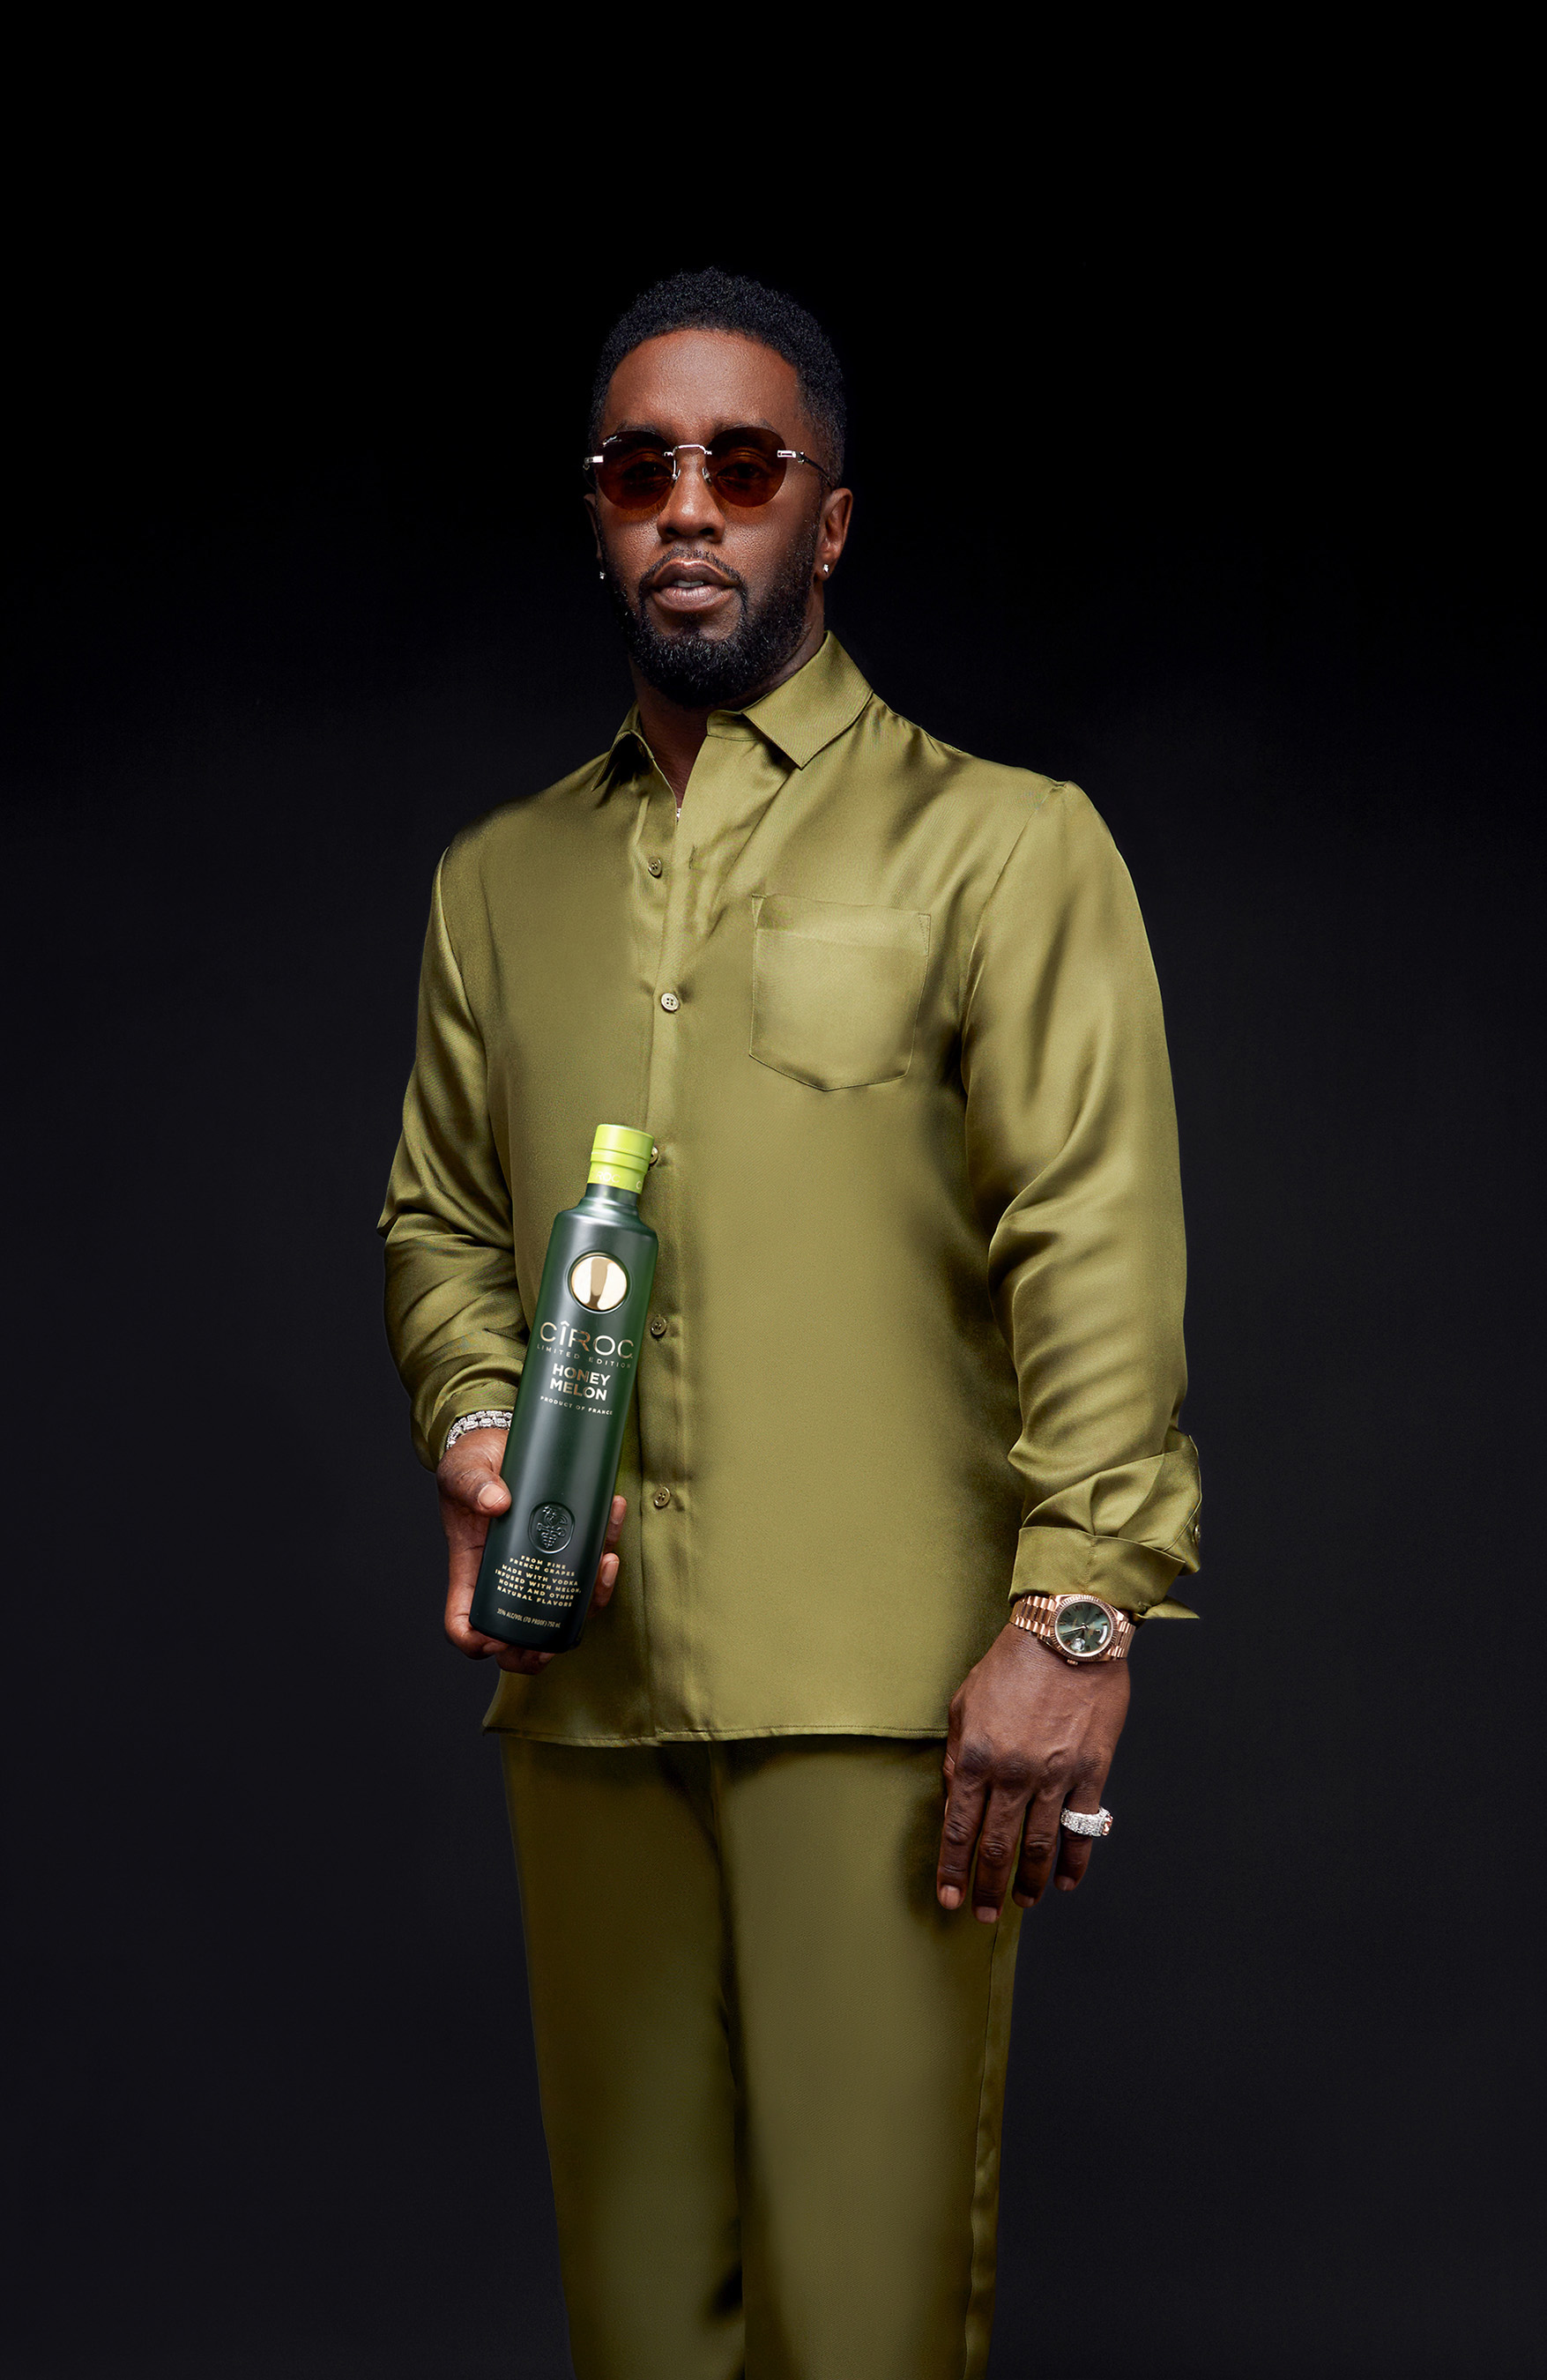 Sean "Diddy" Combs and the makers of CÎROC Ultra-Premium Vodka Release New Limited-Edition CÎROC Honey Melon